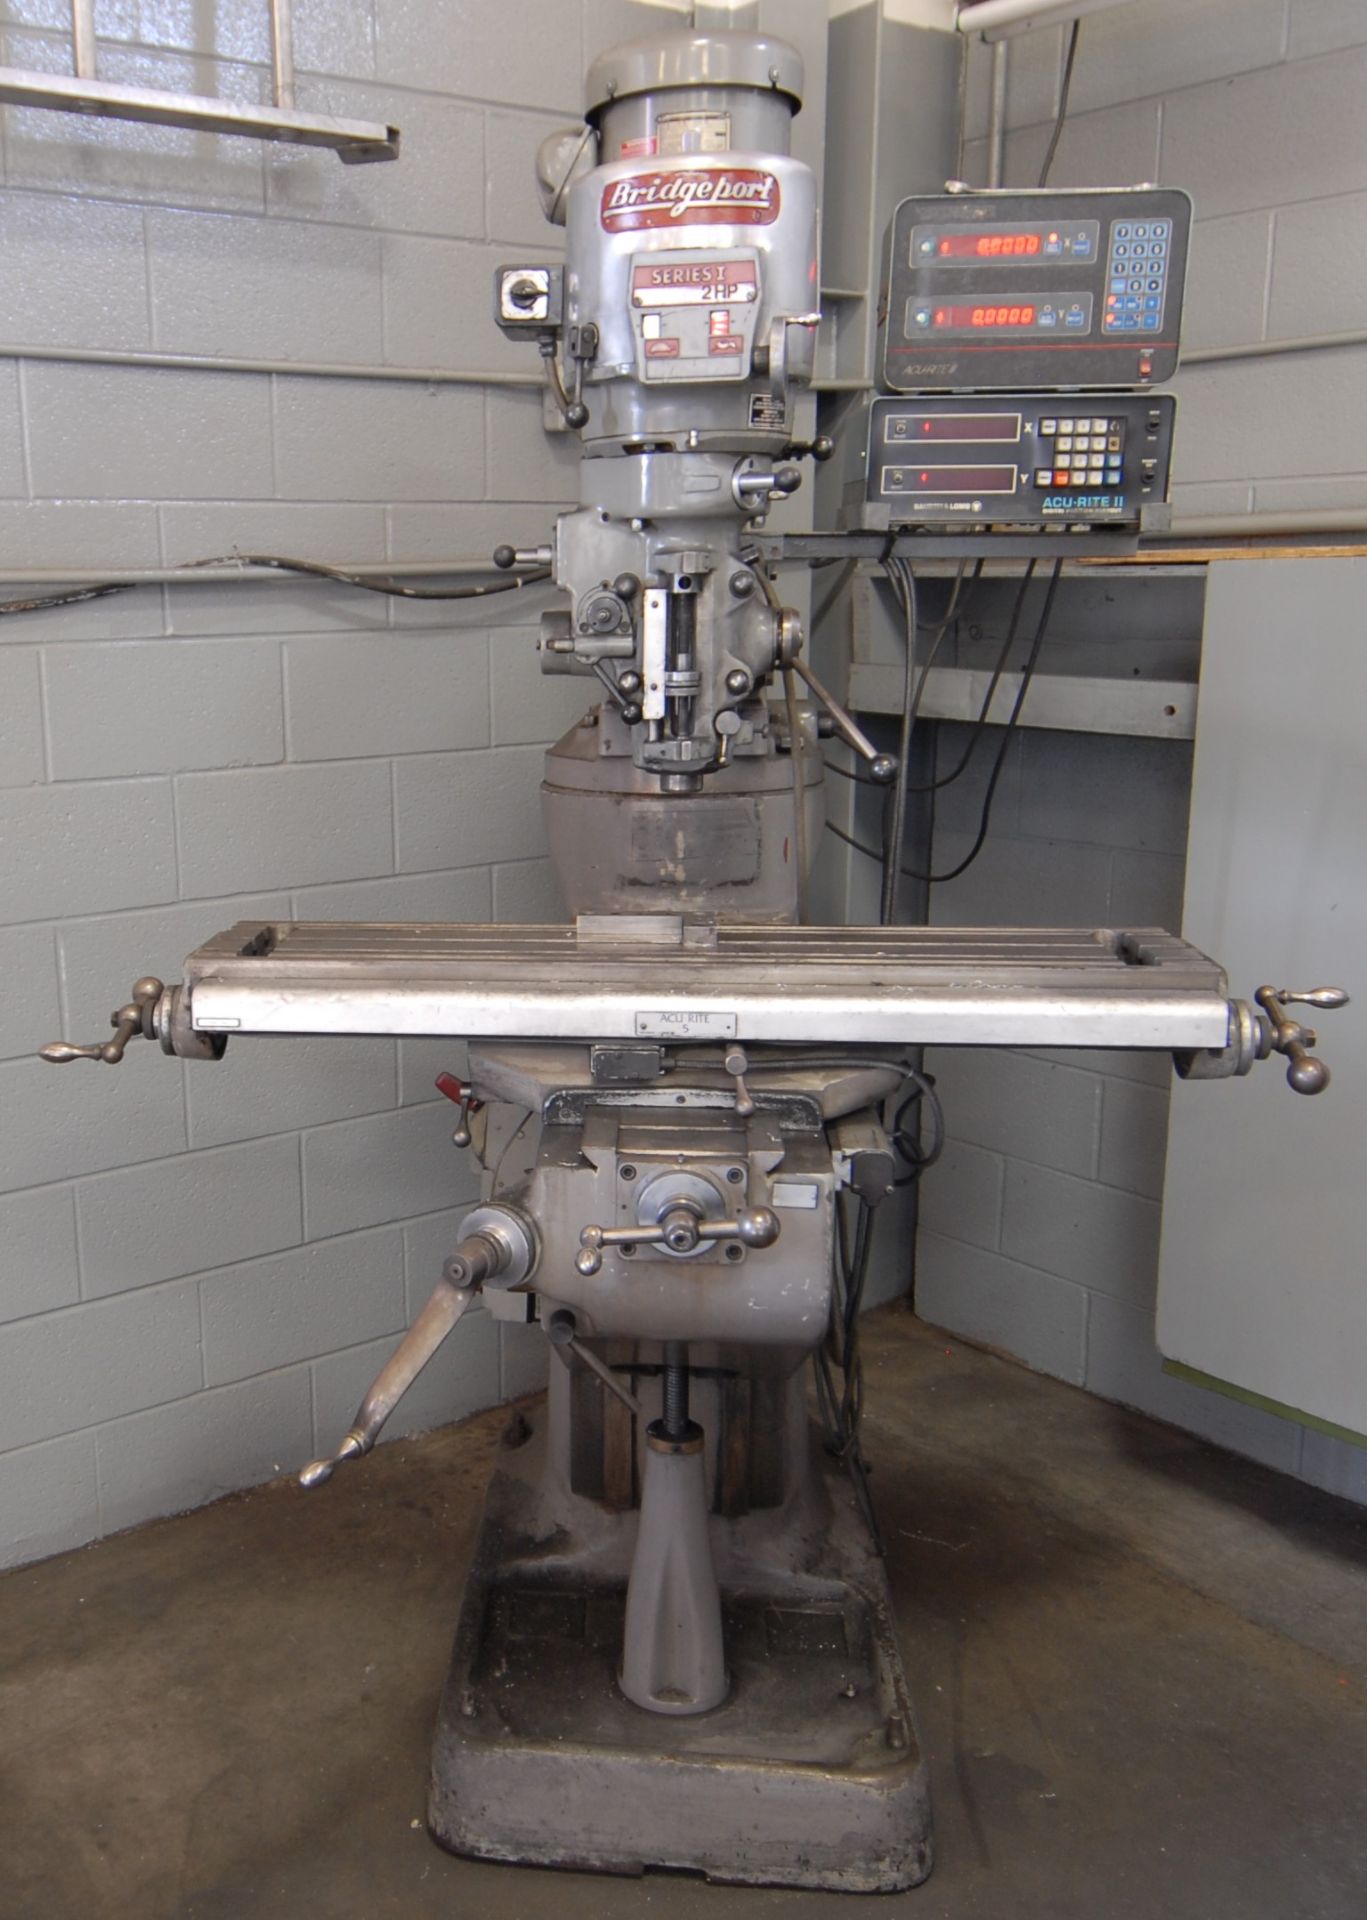 BRIDGEPORT SERIES I VERTICAL TURRET MILL WITH 42"X9" TABLE, SPEEDS TO 4200 RPM, 2 HP, ACCURITE 2